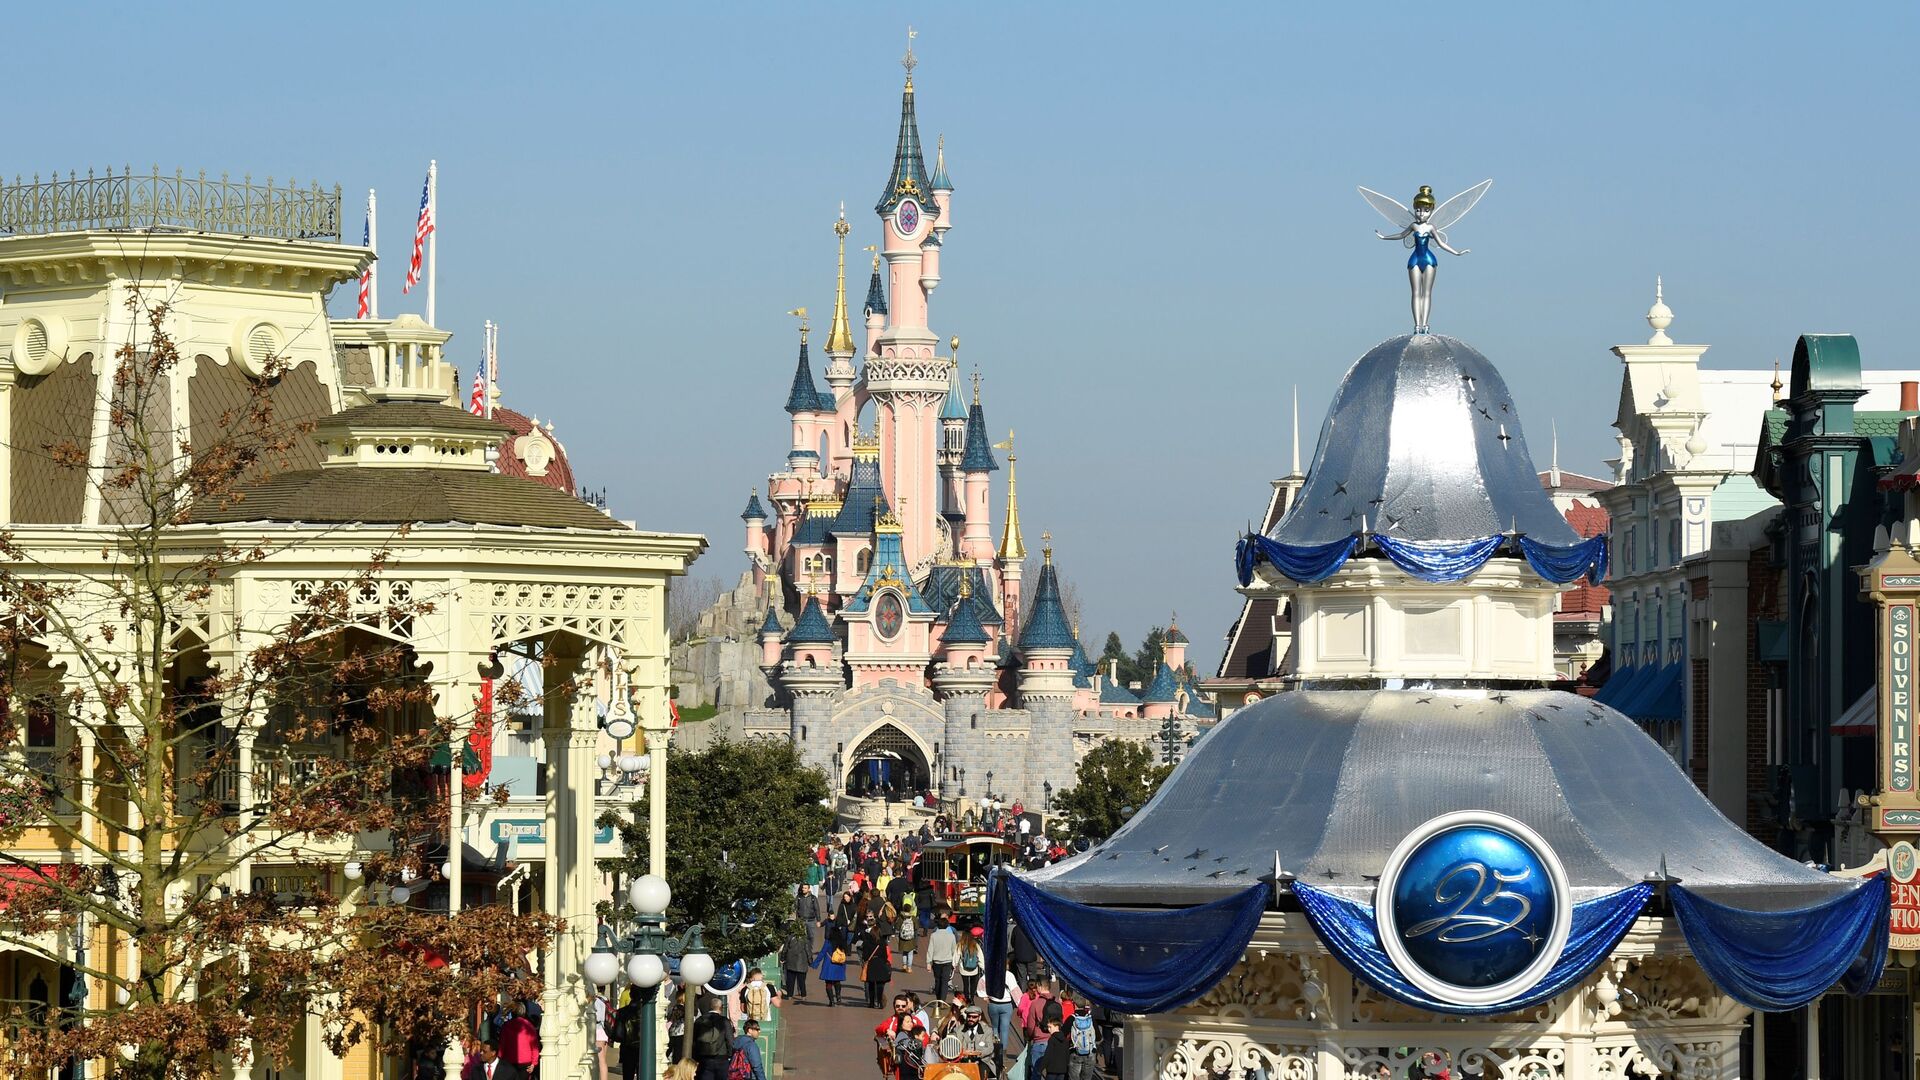 A general view shows Main Street on March 16, 2017 as Disneyland Paris - originally Euro Disney Resort - marks the 25th anniversary in Marne-La-Vallee, east of the French capital Paris. - The 25th anniversary celebrations will begin on March 26, 2017 with parades, various shows and a firework's display. (Photo by BERTRAND GUAY / AFP) - اسپوتنیک افغانستان  , 1920, 12.05.2022